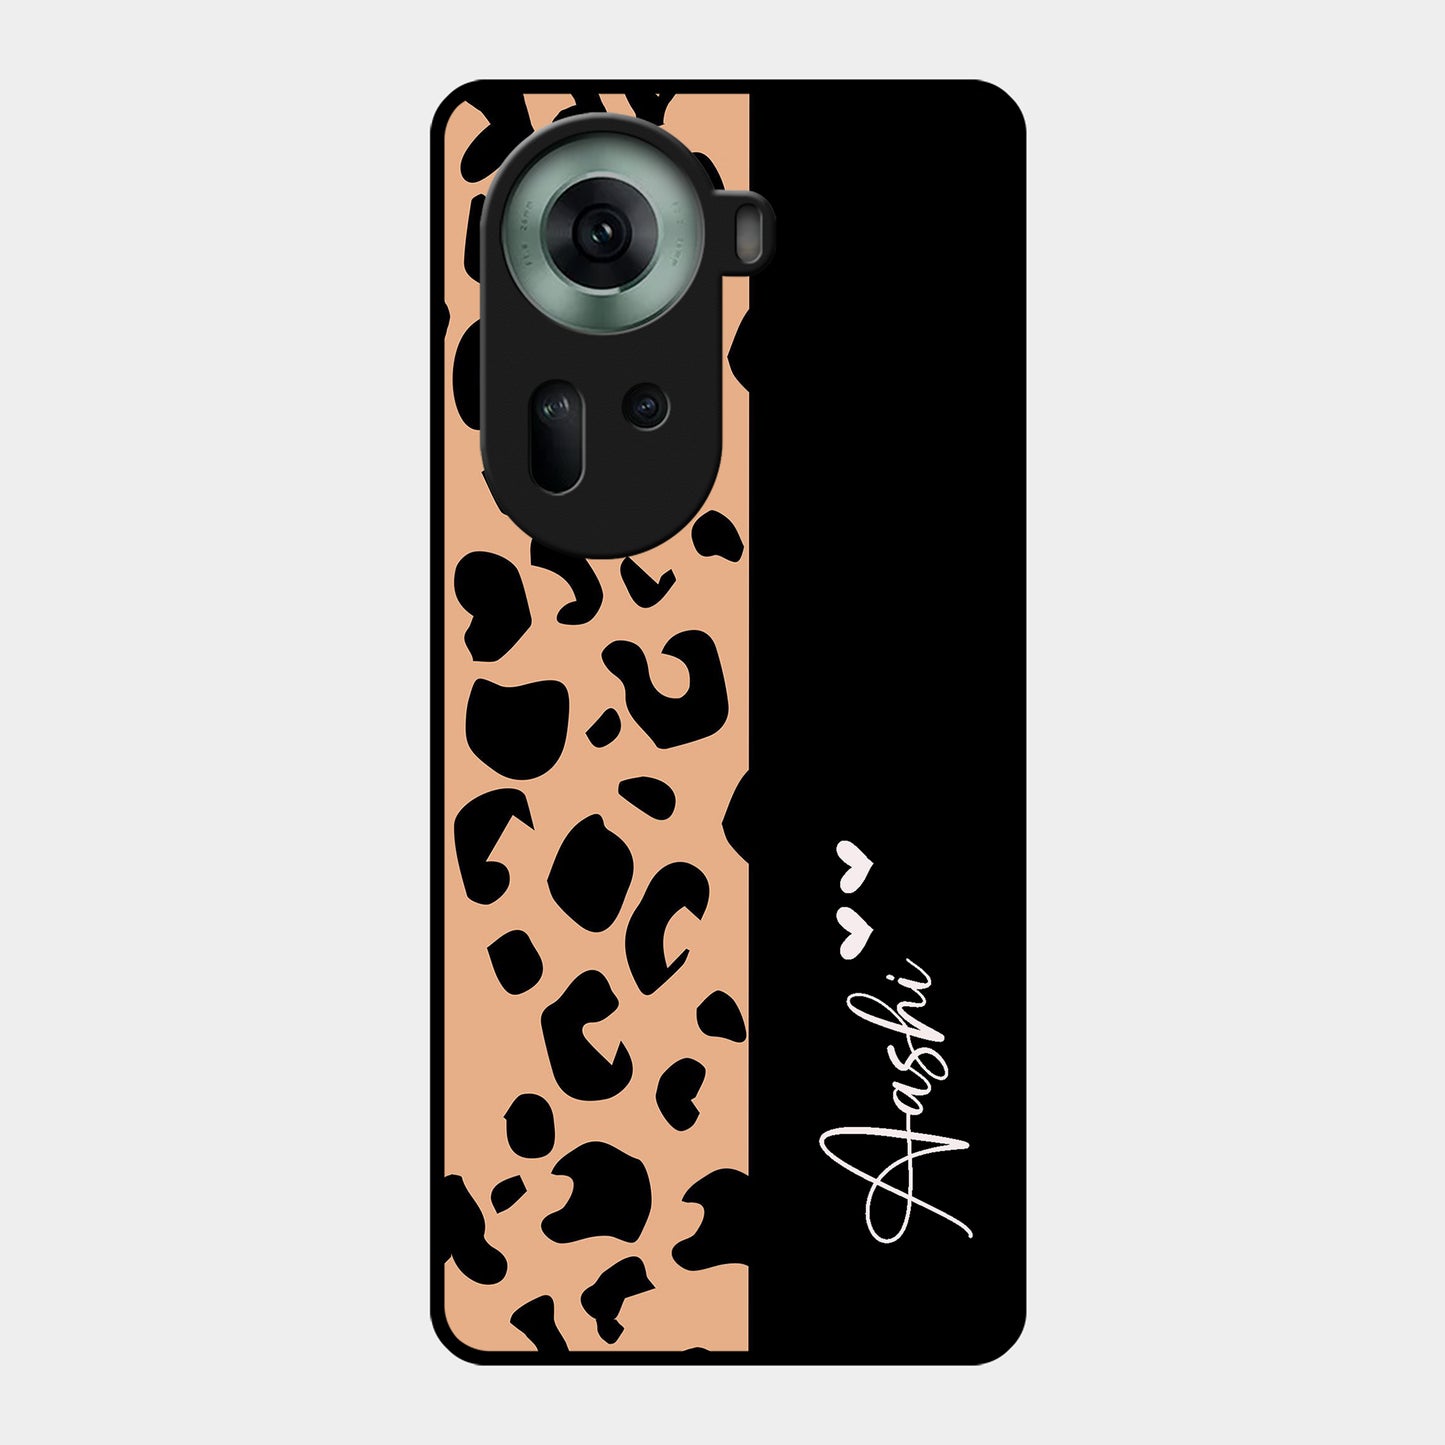 Leopard Glossy Metal Case Cover For Oppo